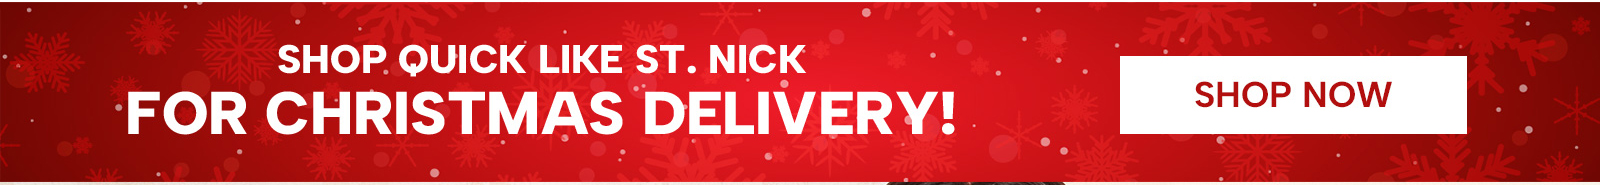 Shop Quick Like St. Nick for Delivery By Christmas